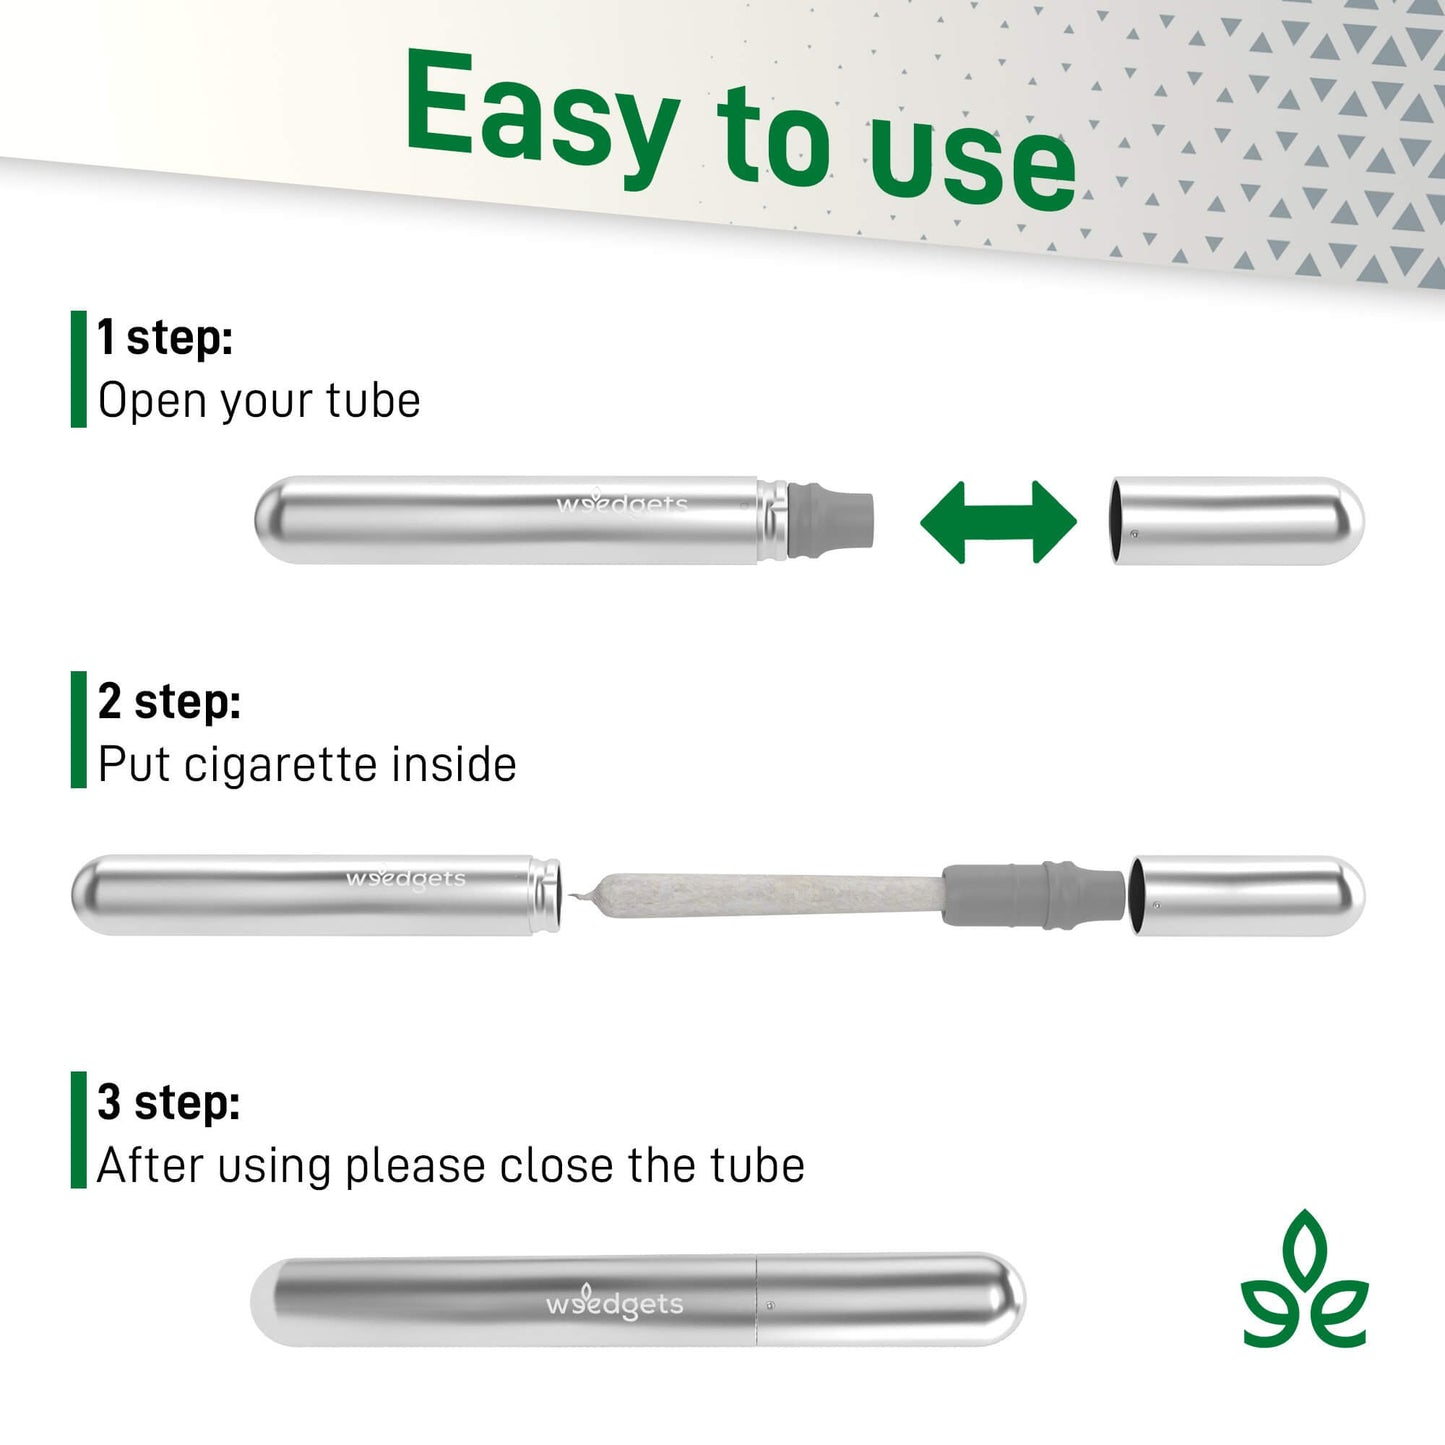 Water Tight & Smell Proof Filtered Case for Joints & Prerolls Smoke Drop 